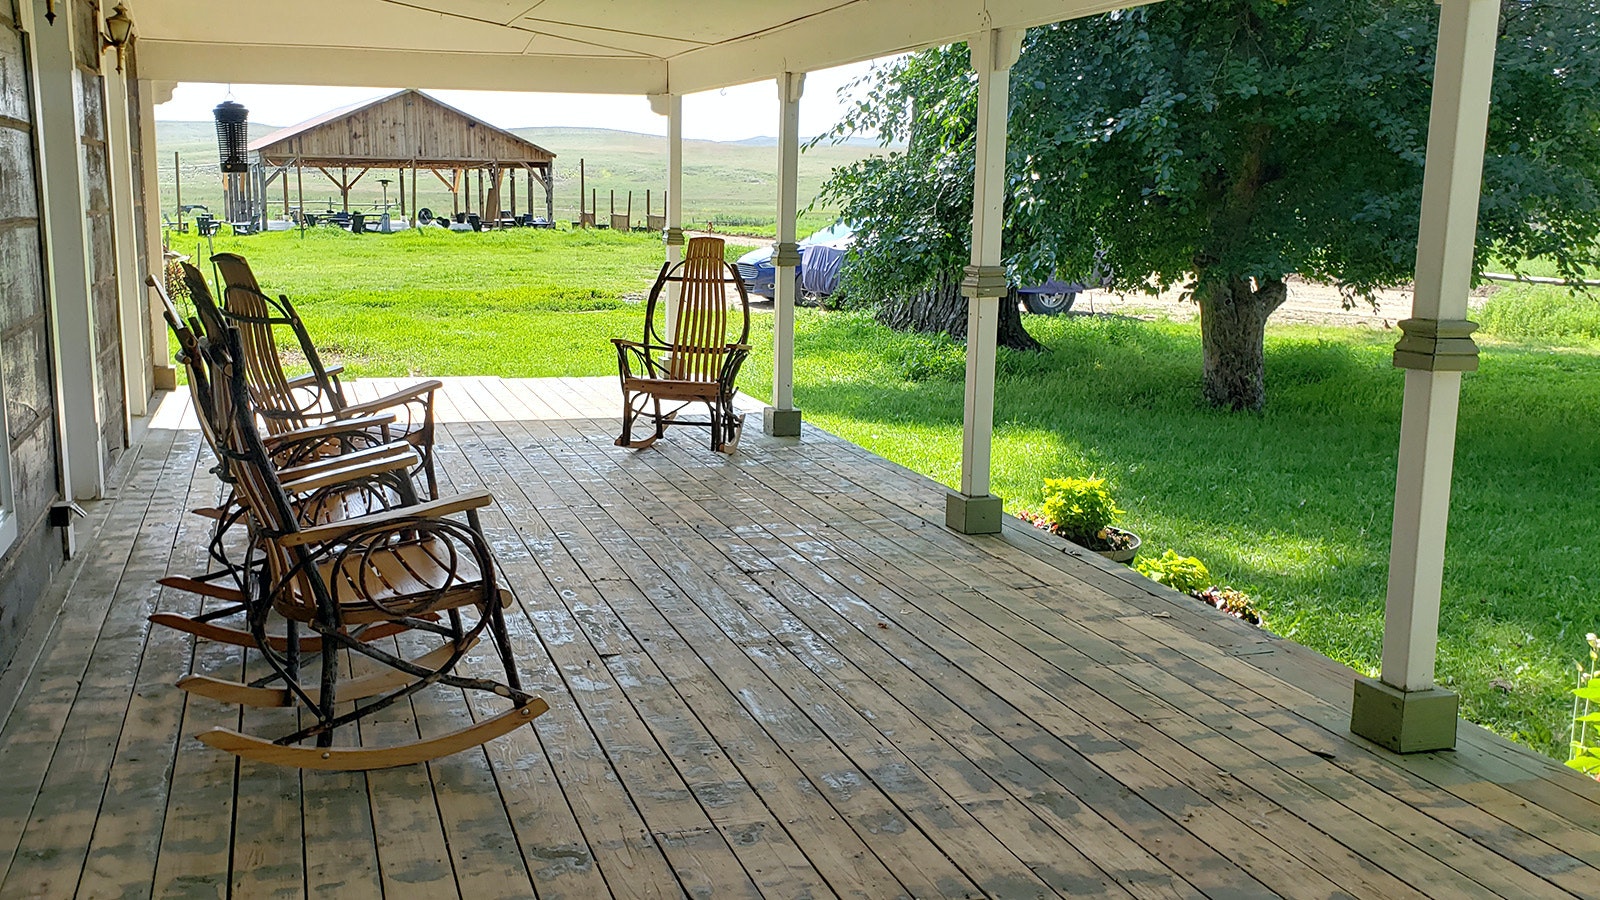 The porch has a nice view of the ranch with plenty of rocking chairs to sit a spell.